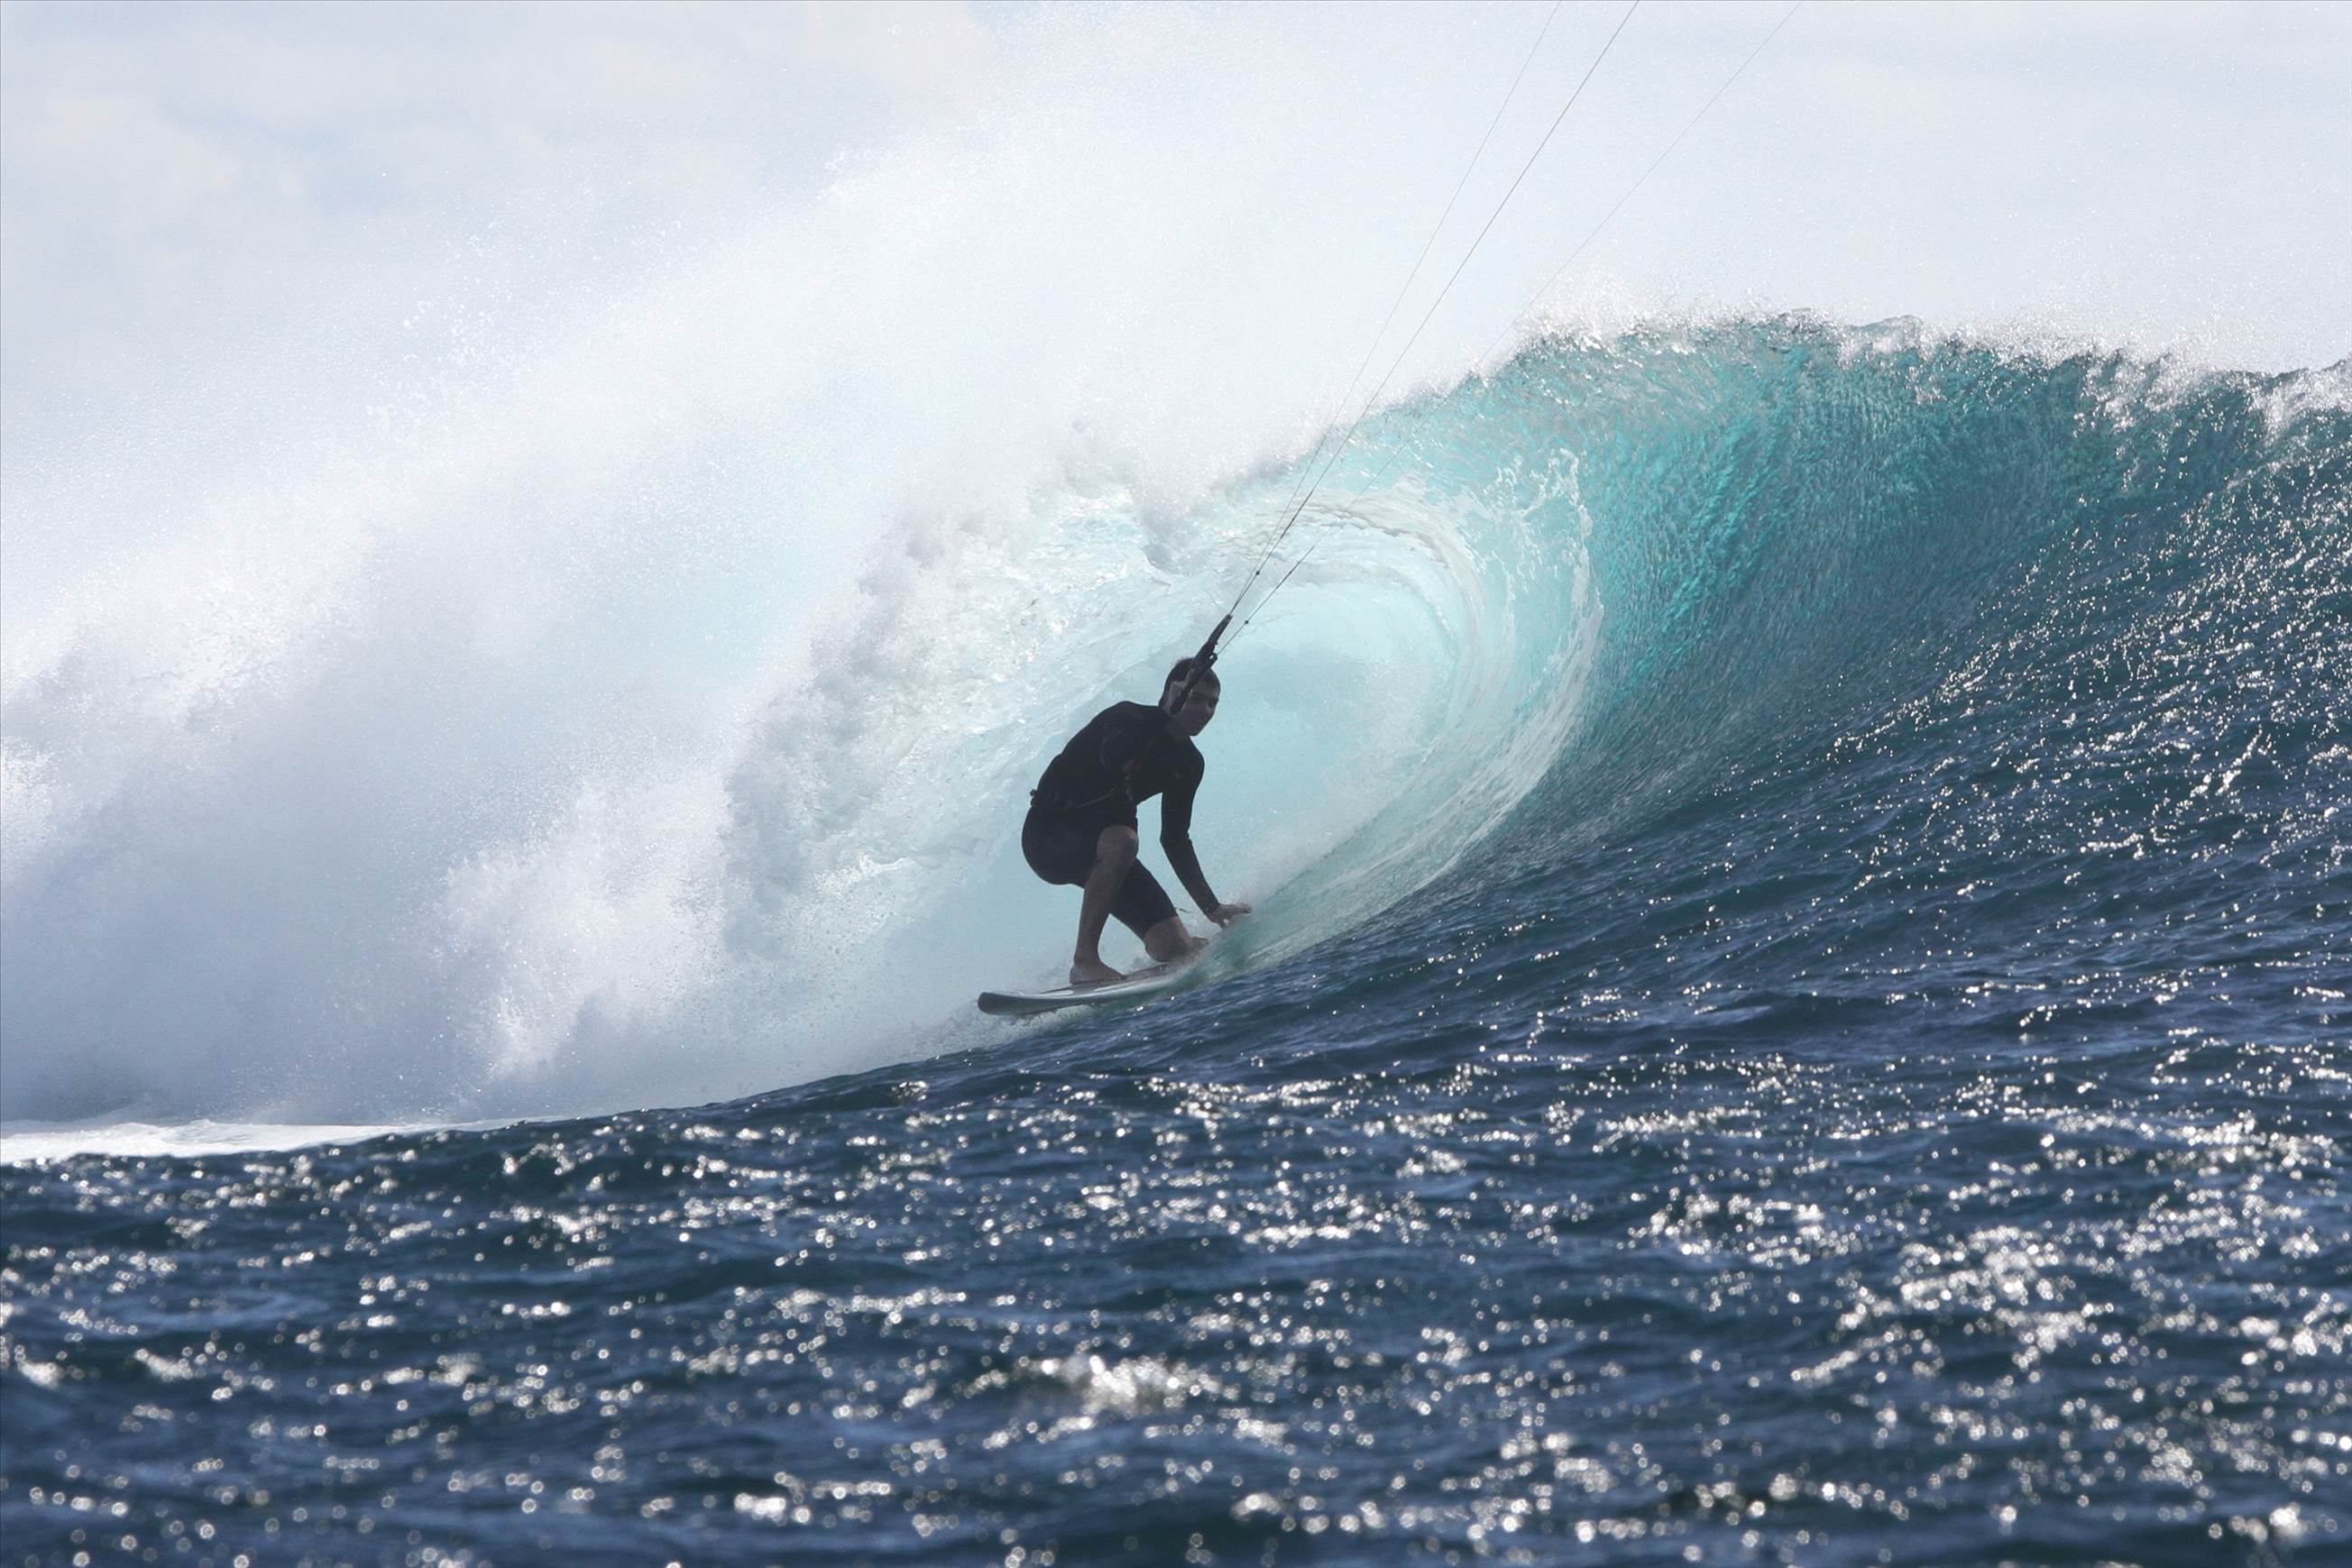 Some nice wave pictures | Kitesurfing Forums, page 1